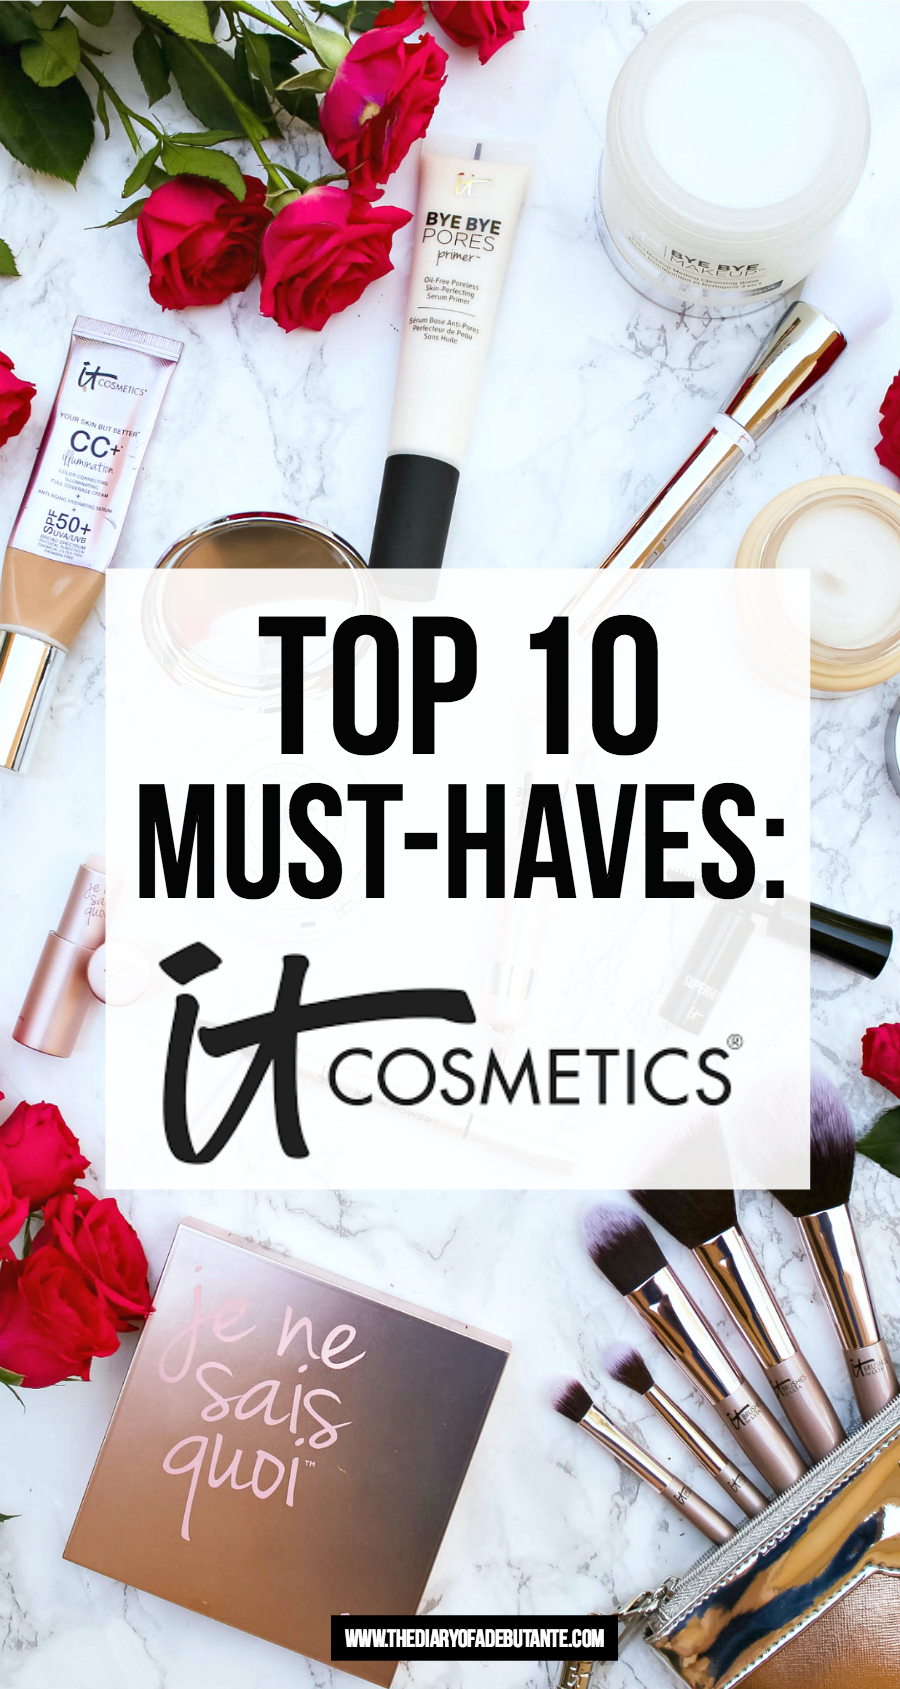 The top ten must-have It Cosmetics products for 2017